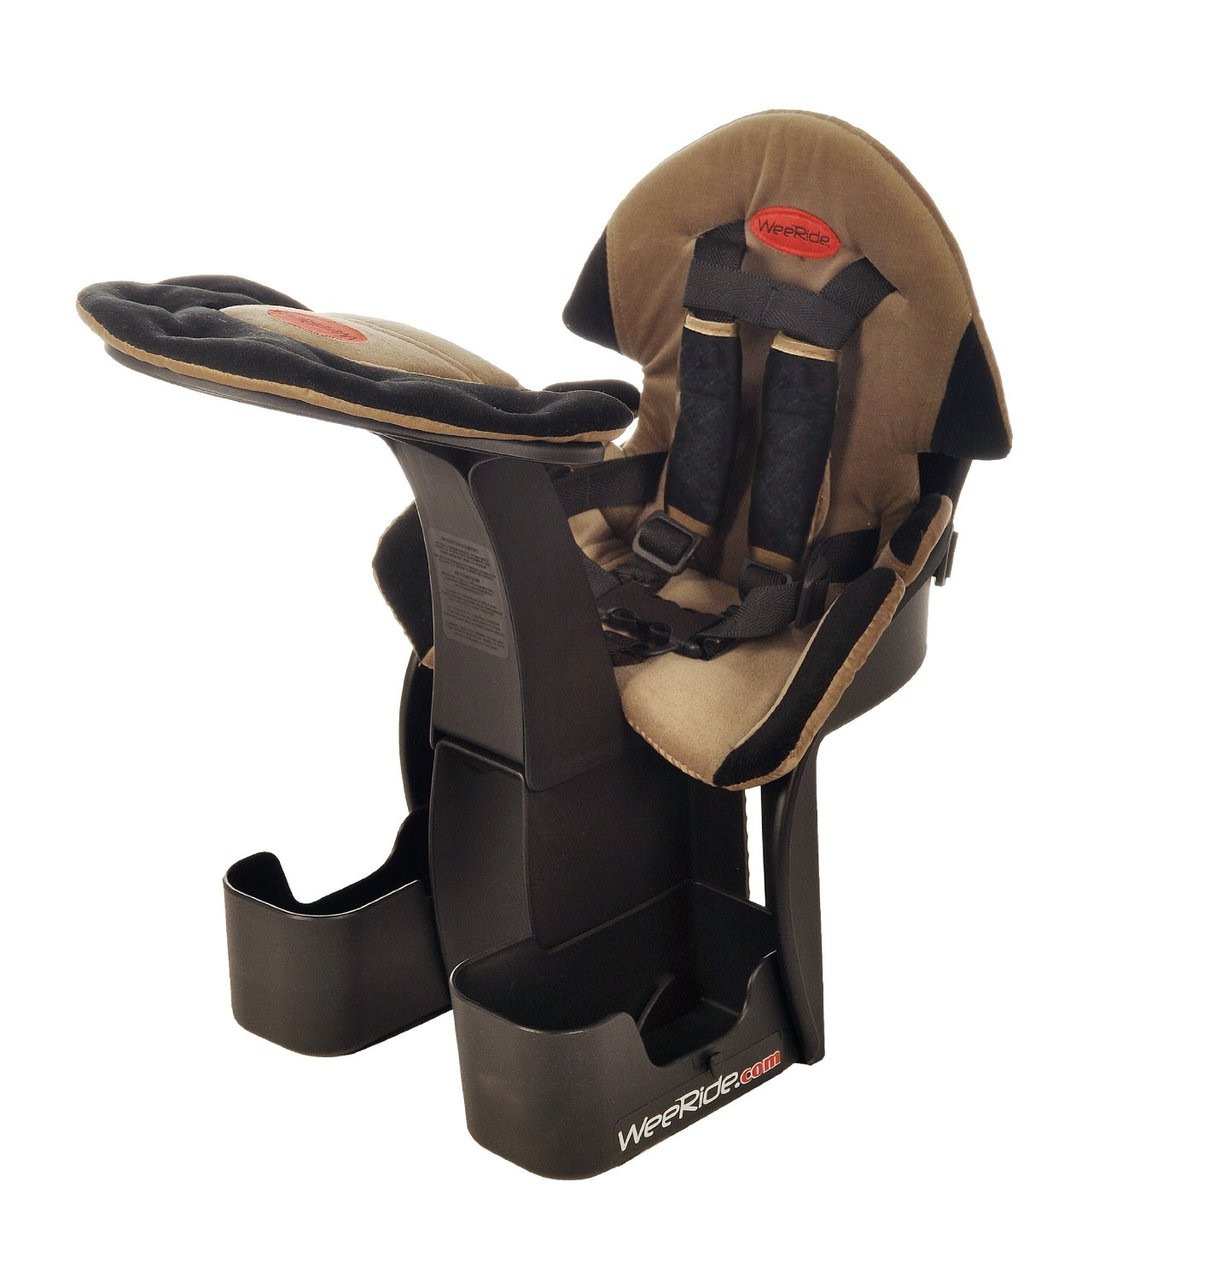 WeeRide Safe Child Baby Bike Seat. Also stocked in 99 Bikes and